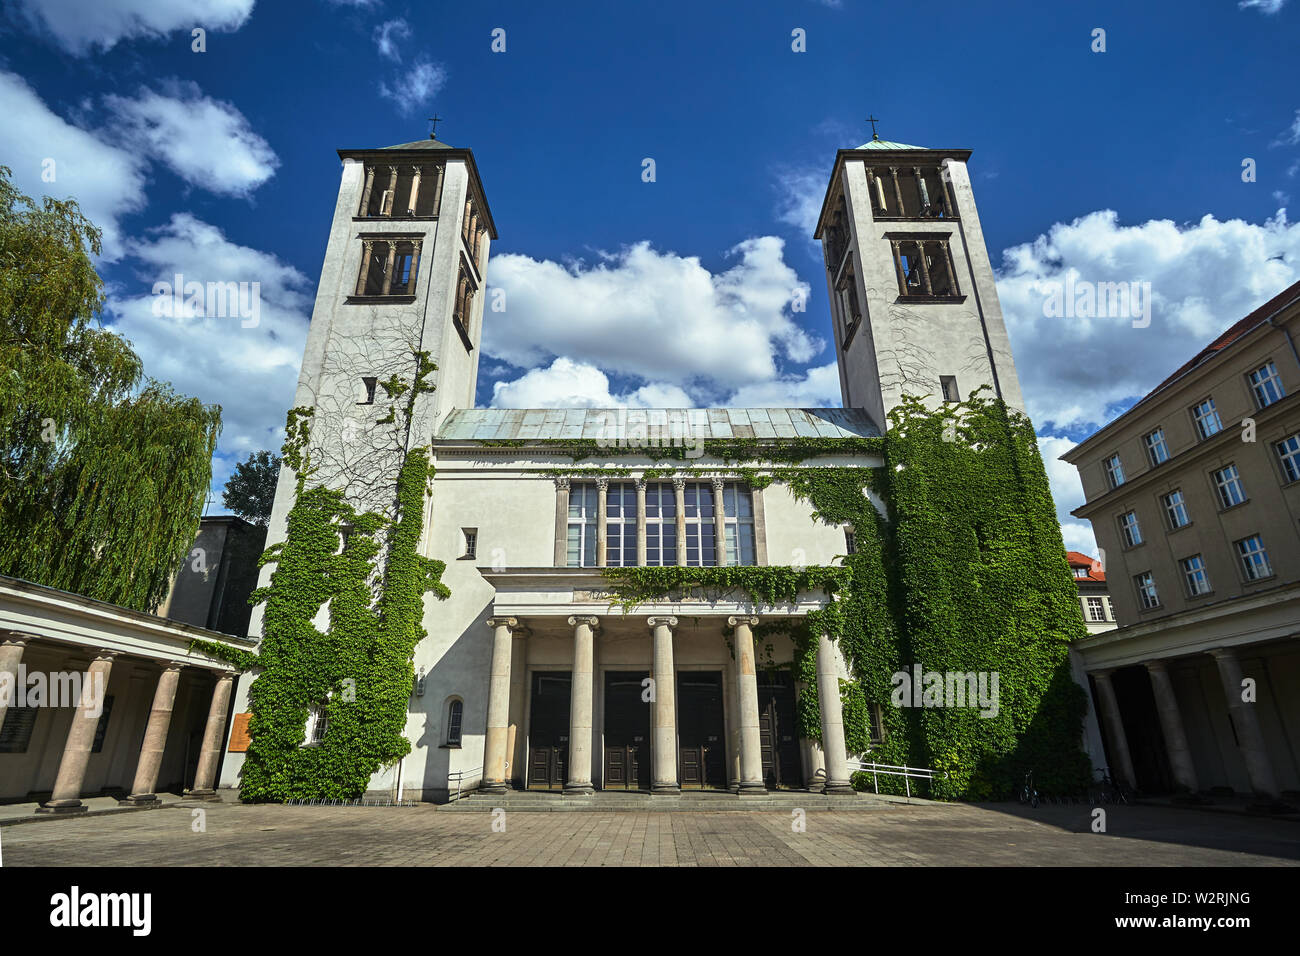 Eclectic facade of the Catholic temple with two towers in Poznan Stock Photo